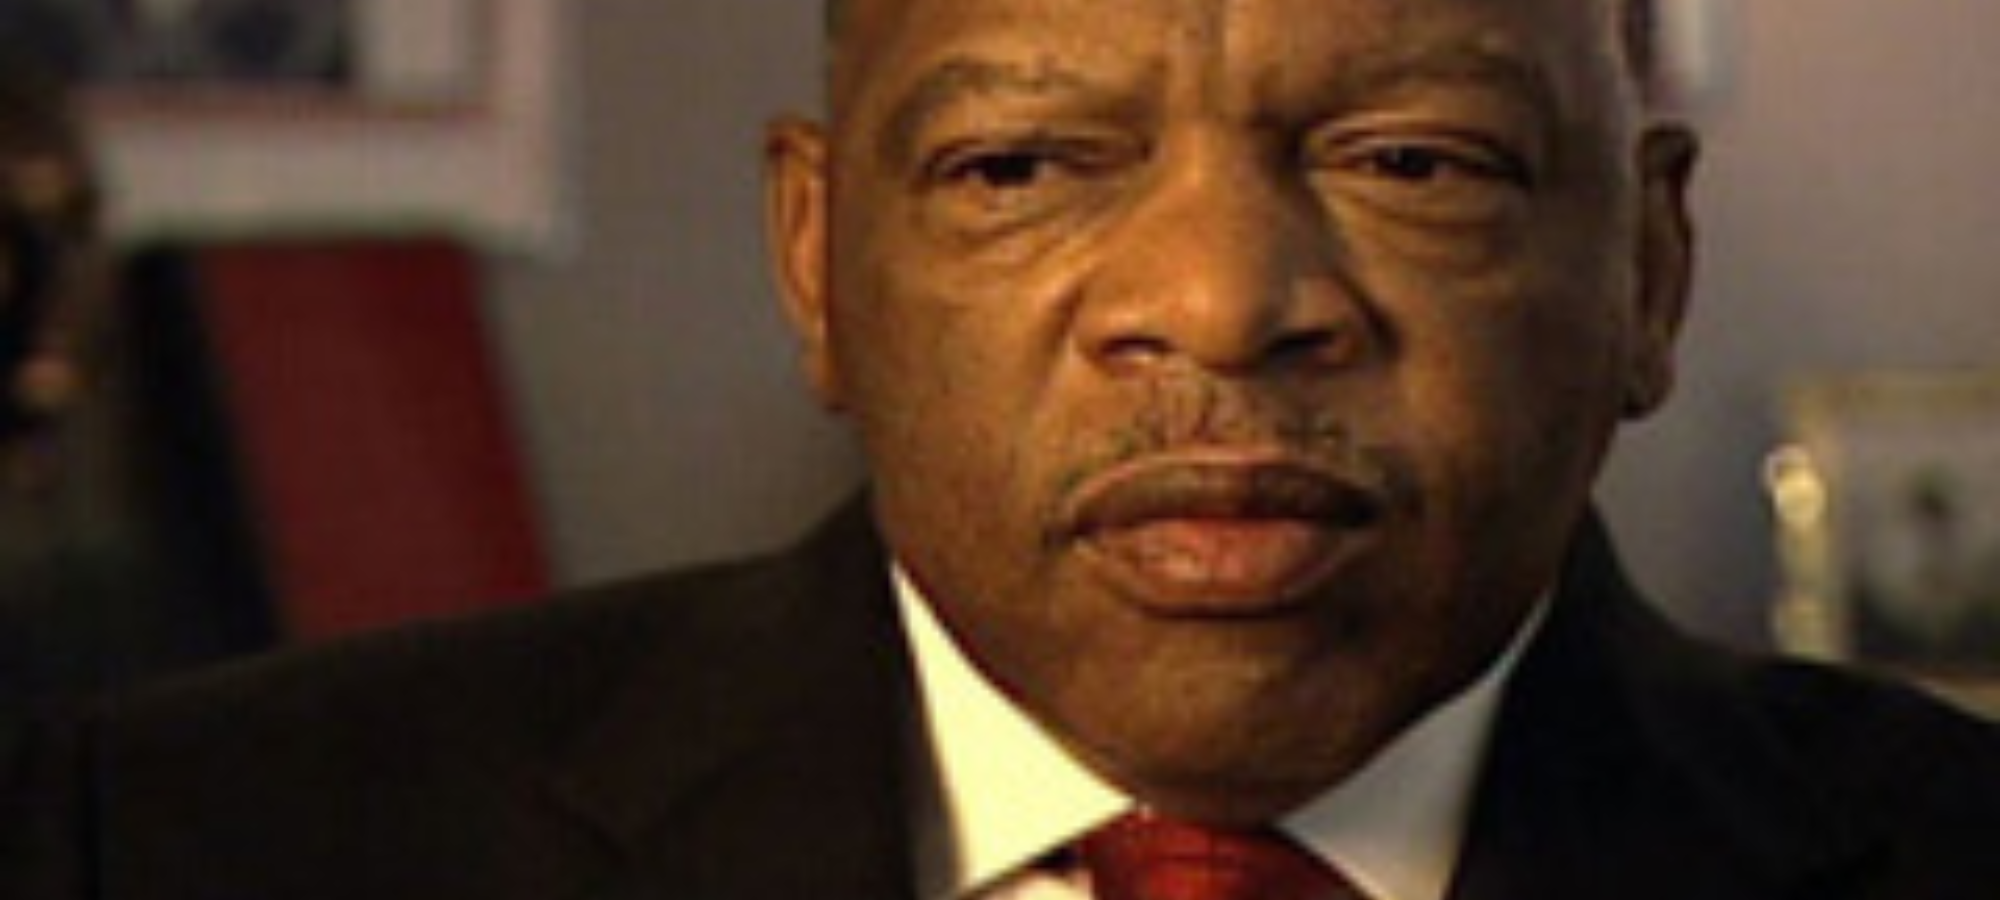 PBS: Kim Lawton’s extended interview with Rep. John Lewis